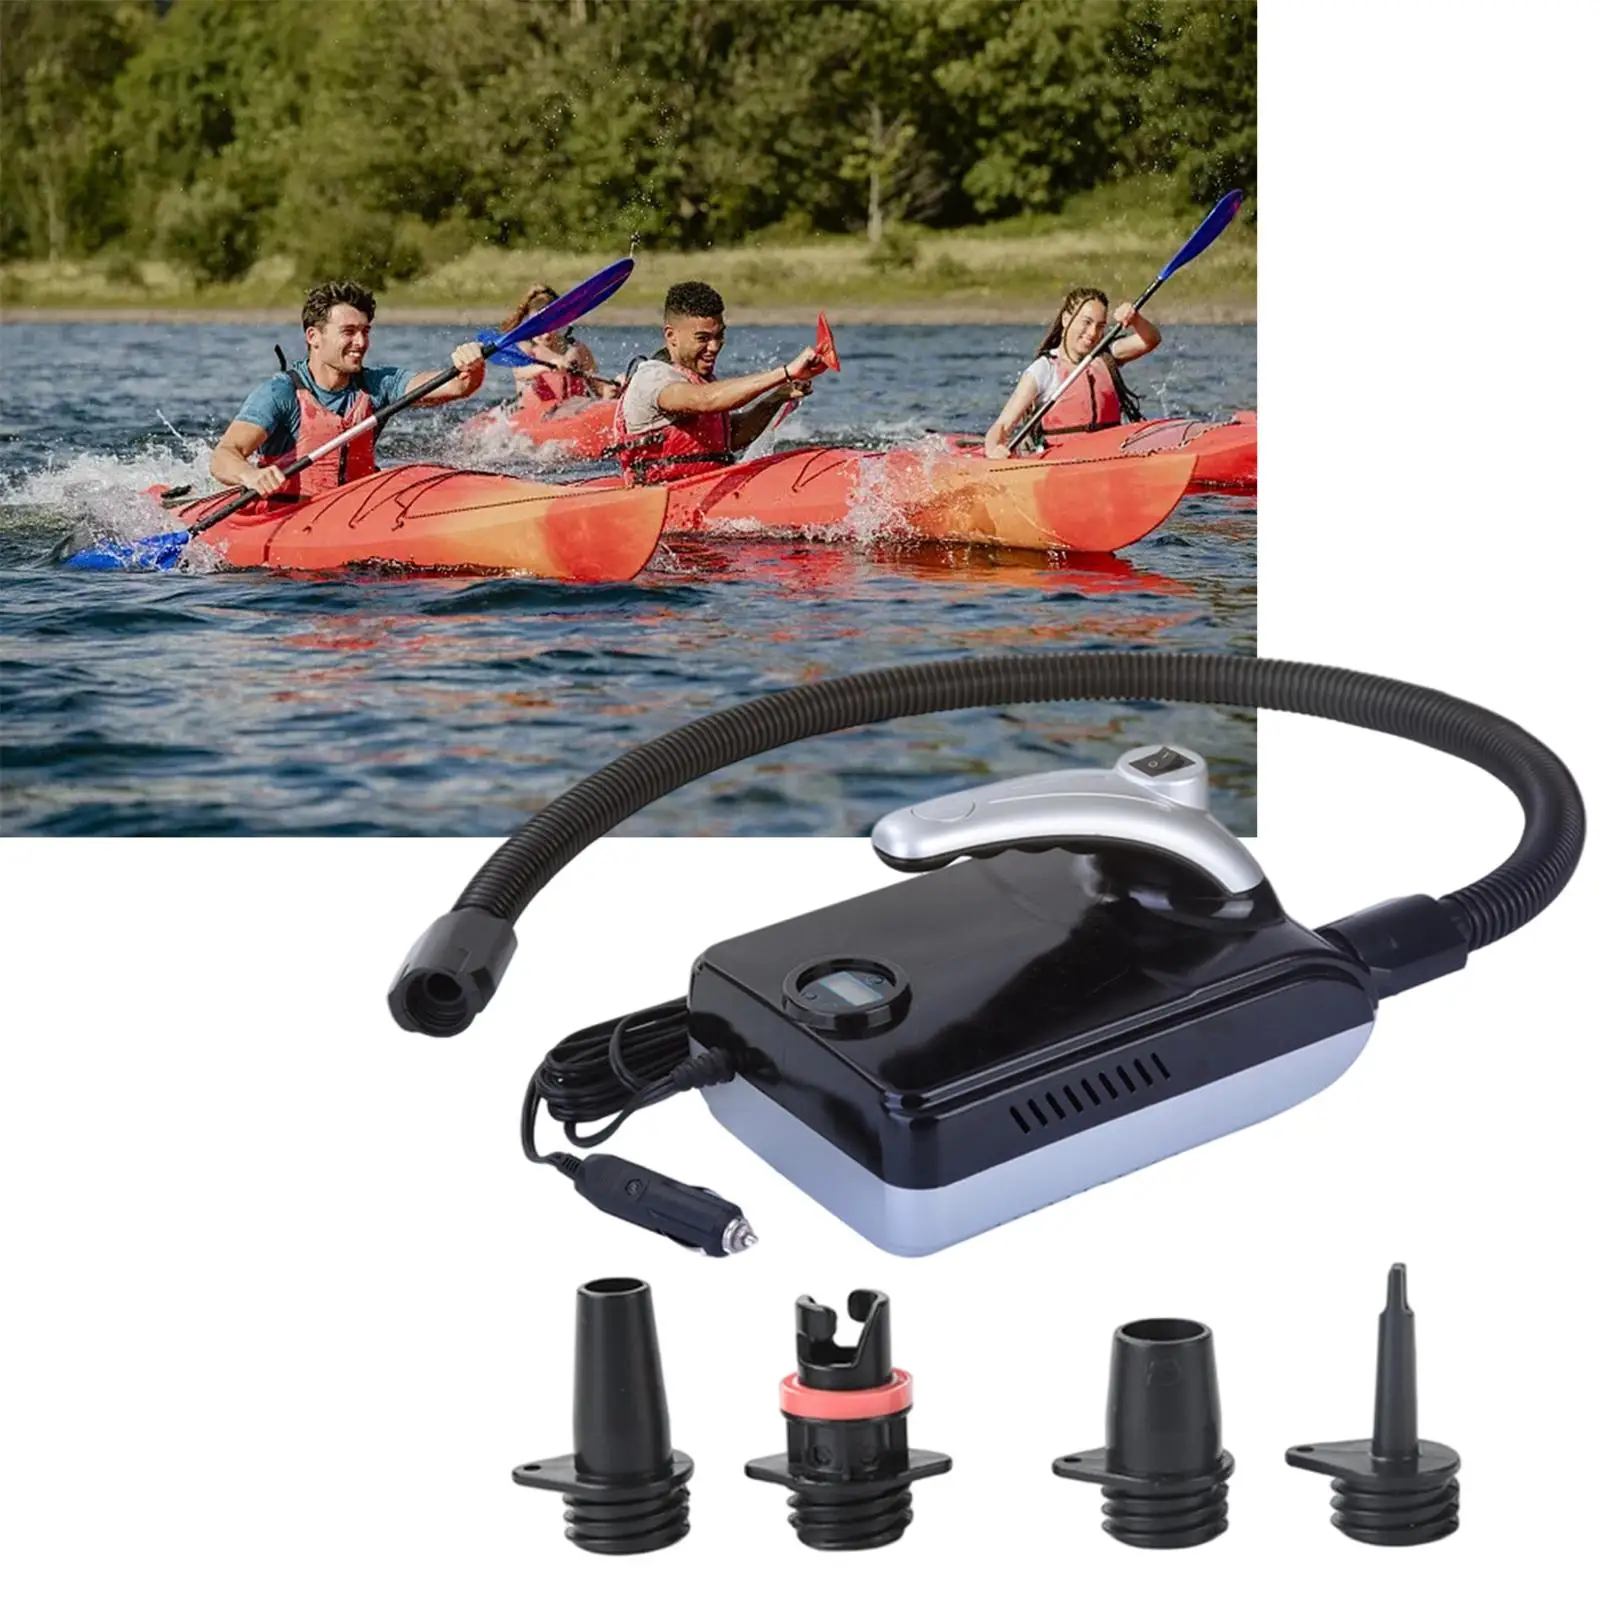 0~20PSI Electric Air Pump Quick Air Inflator Multifunction W/ 4 Nozzles with LED Digital Display Pump for Stand up Paddle